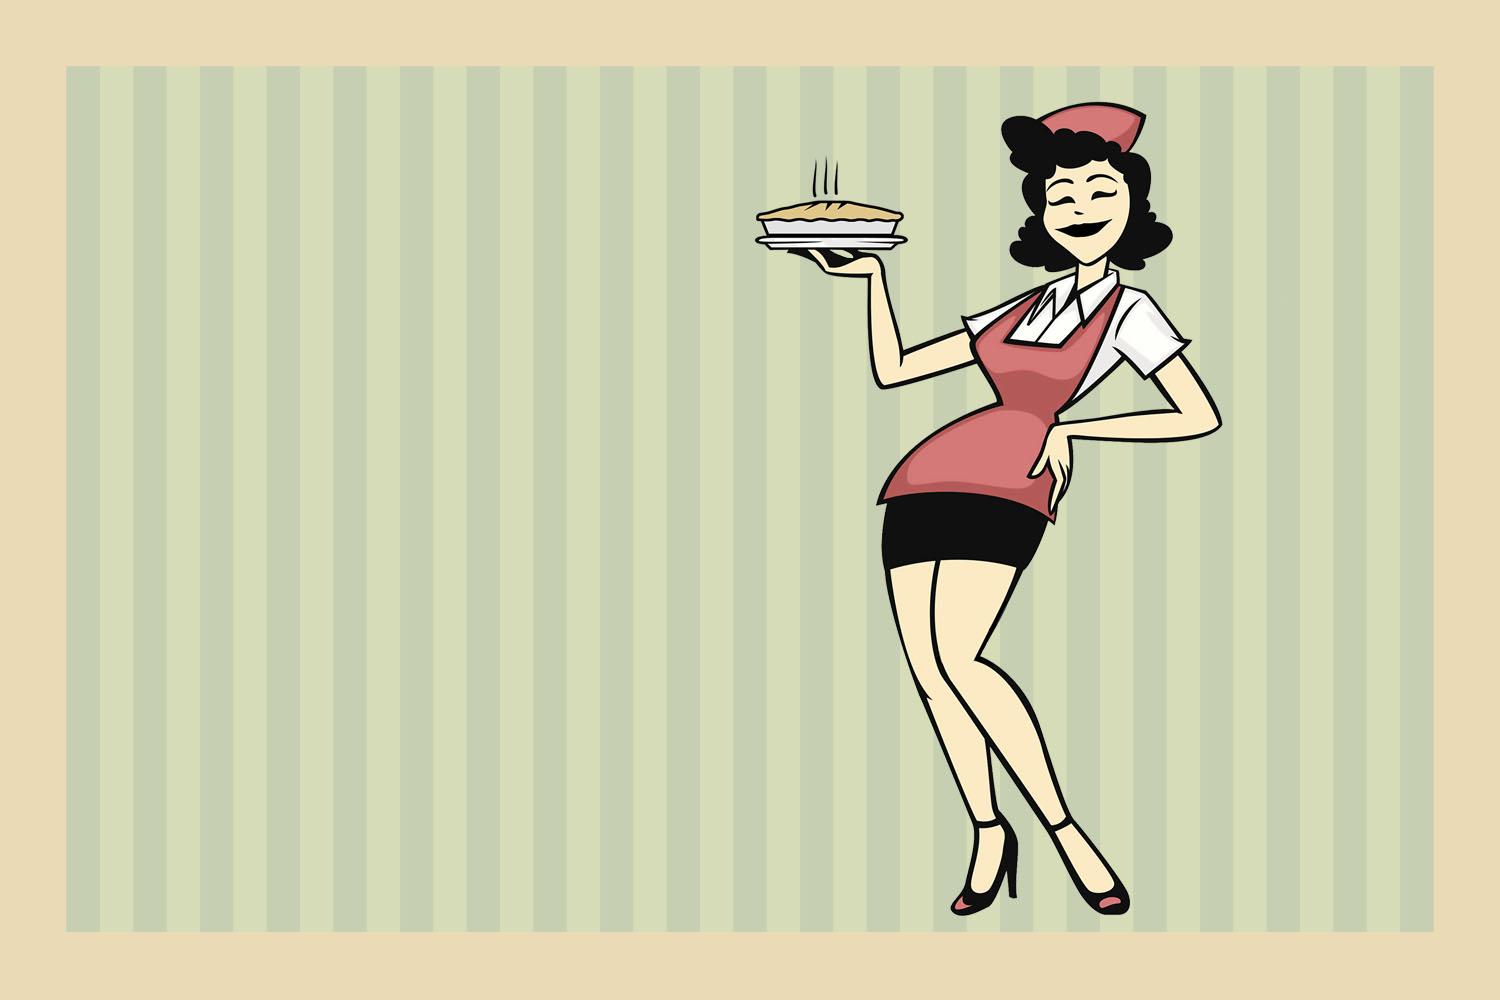 A waitress holds a pie in one hand with her other hand resting on her waist.